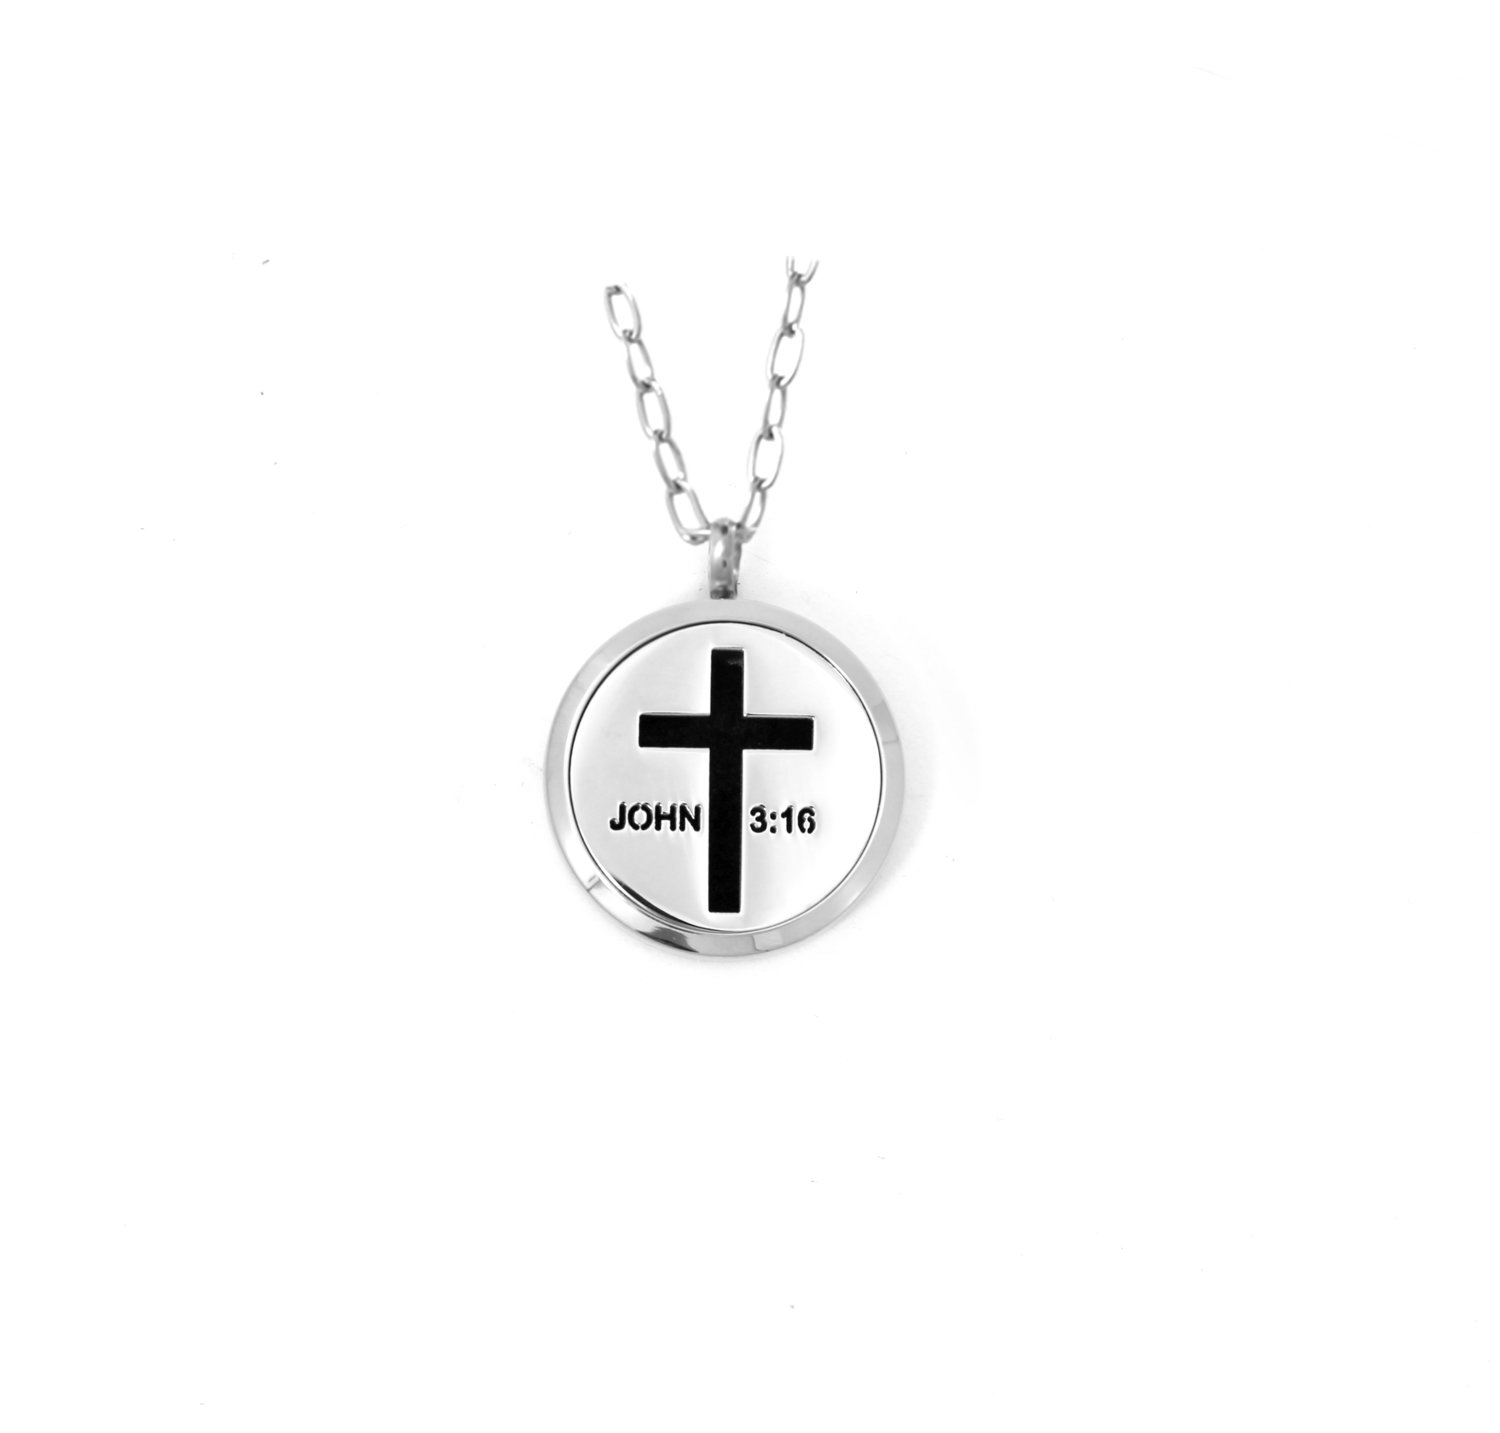 Diffusing Magnetic Cross - John 3:16 Pendant - includes Two Leather Inserts